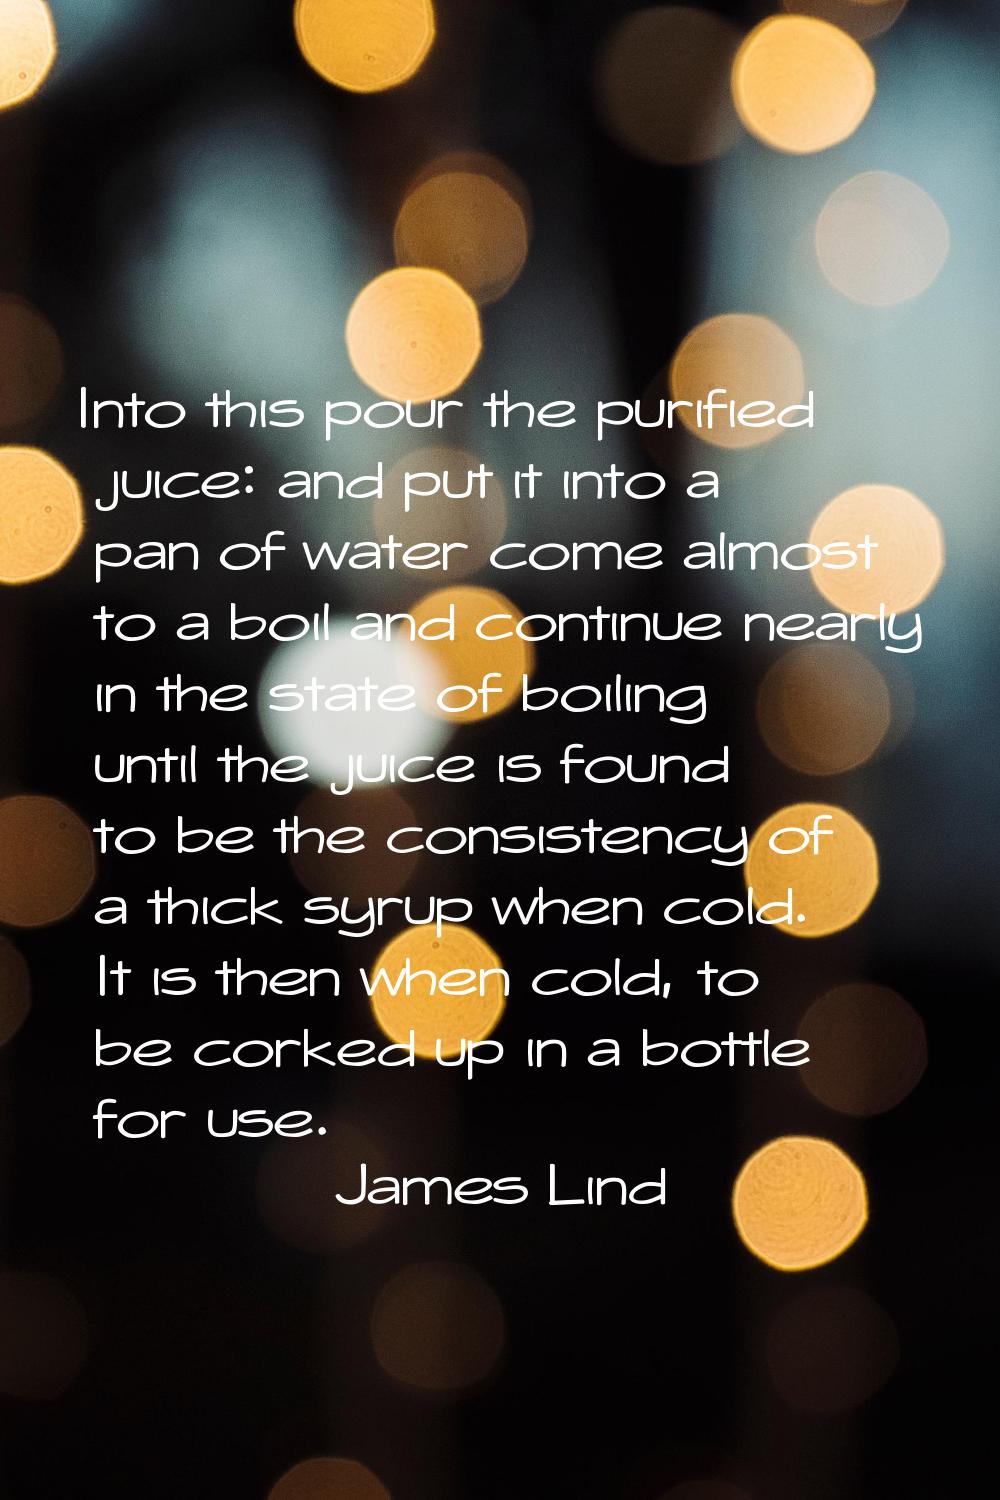 Into this pour the purified juice: and put it into a pan of water come almost to a boil and continu